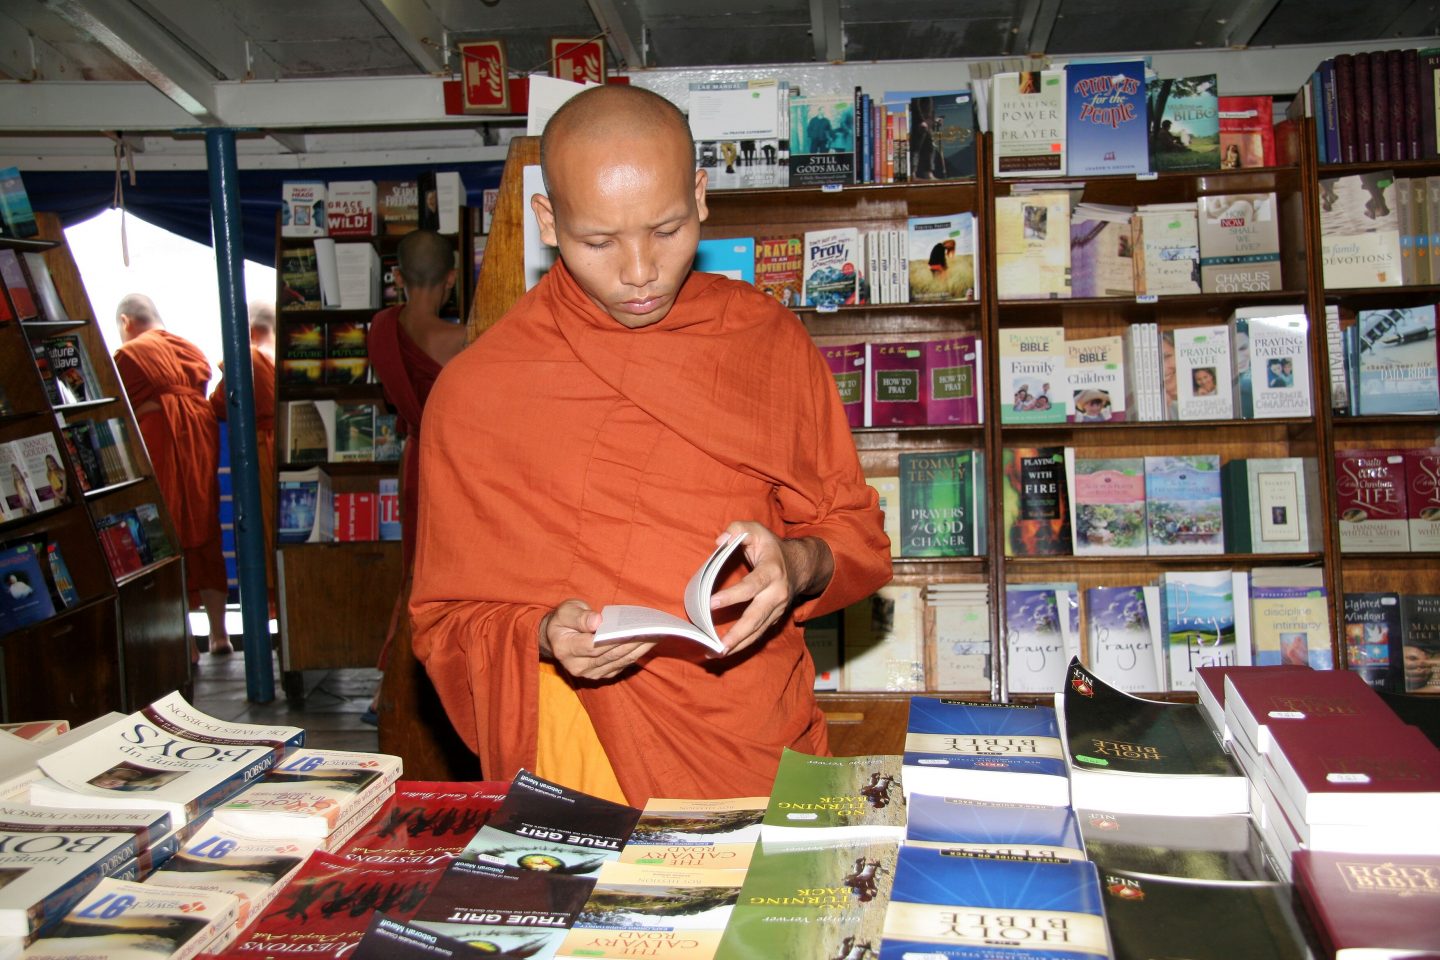 A Buddhist monk reads Christian literature with interest in the book fair in Sattahip, Thailand in 2006. Photo by Stephanie Vaupel.